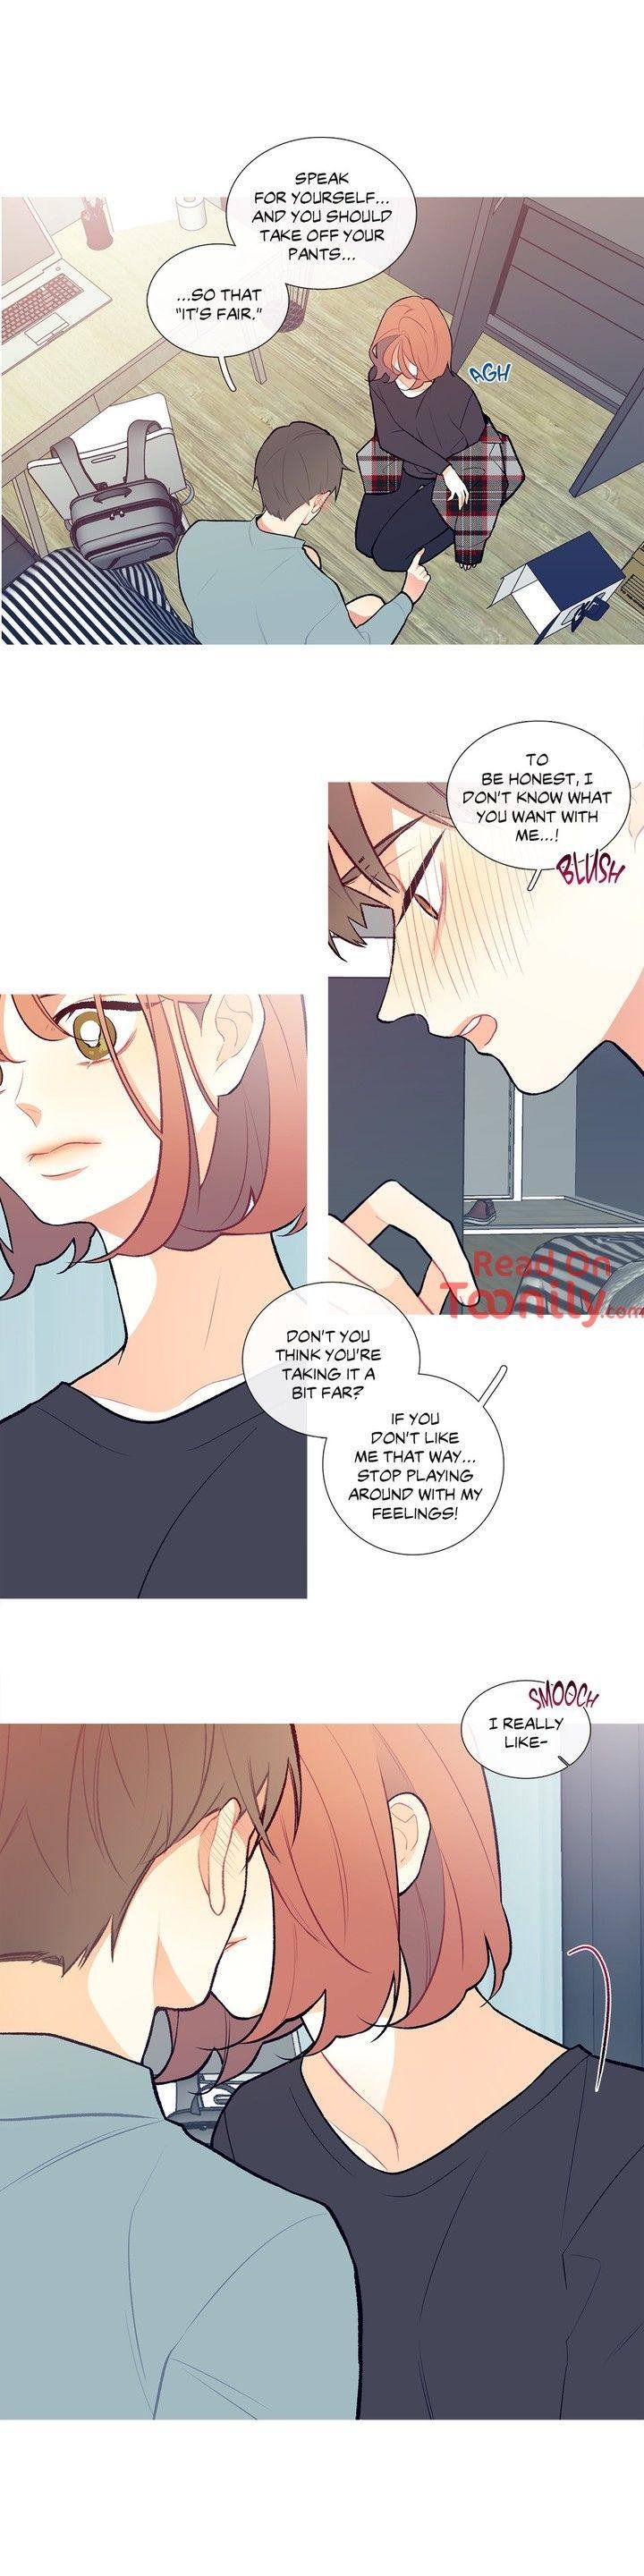 whats-going-on-chap-4-2